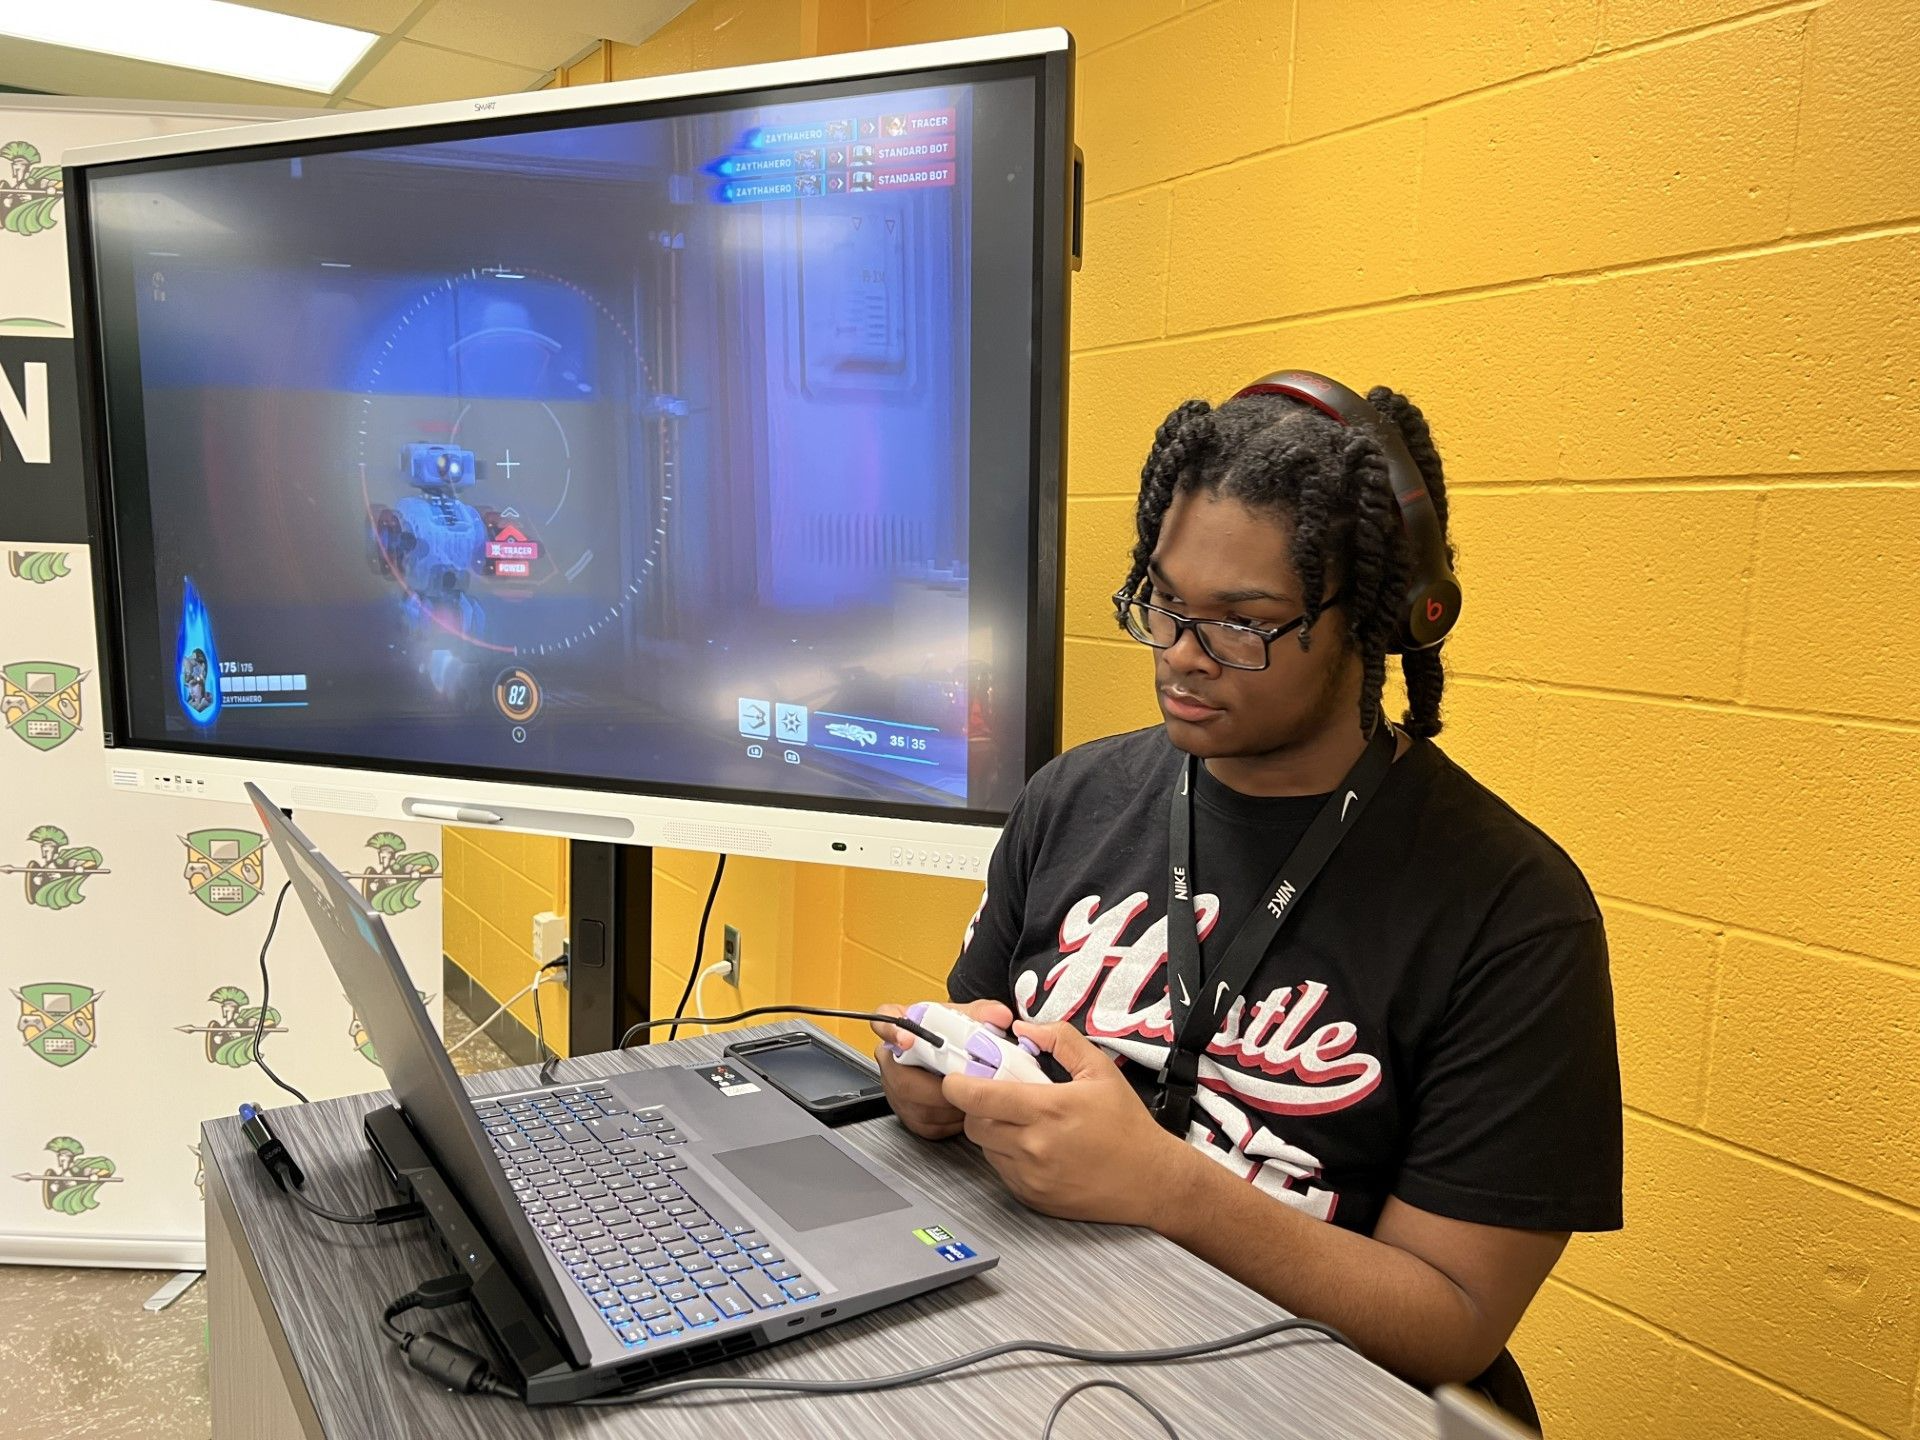 student playing a game on a large screen while looking at laptop